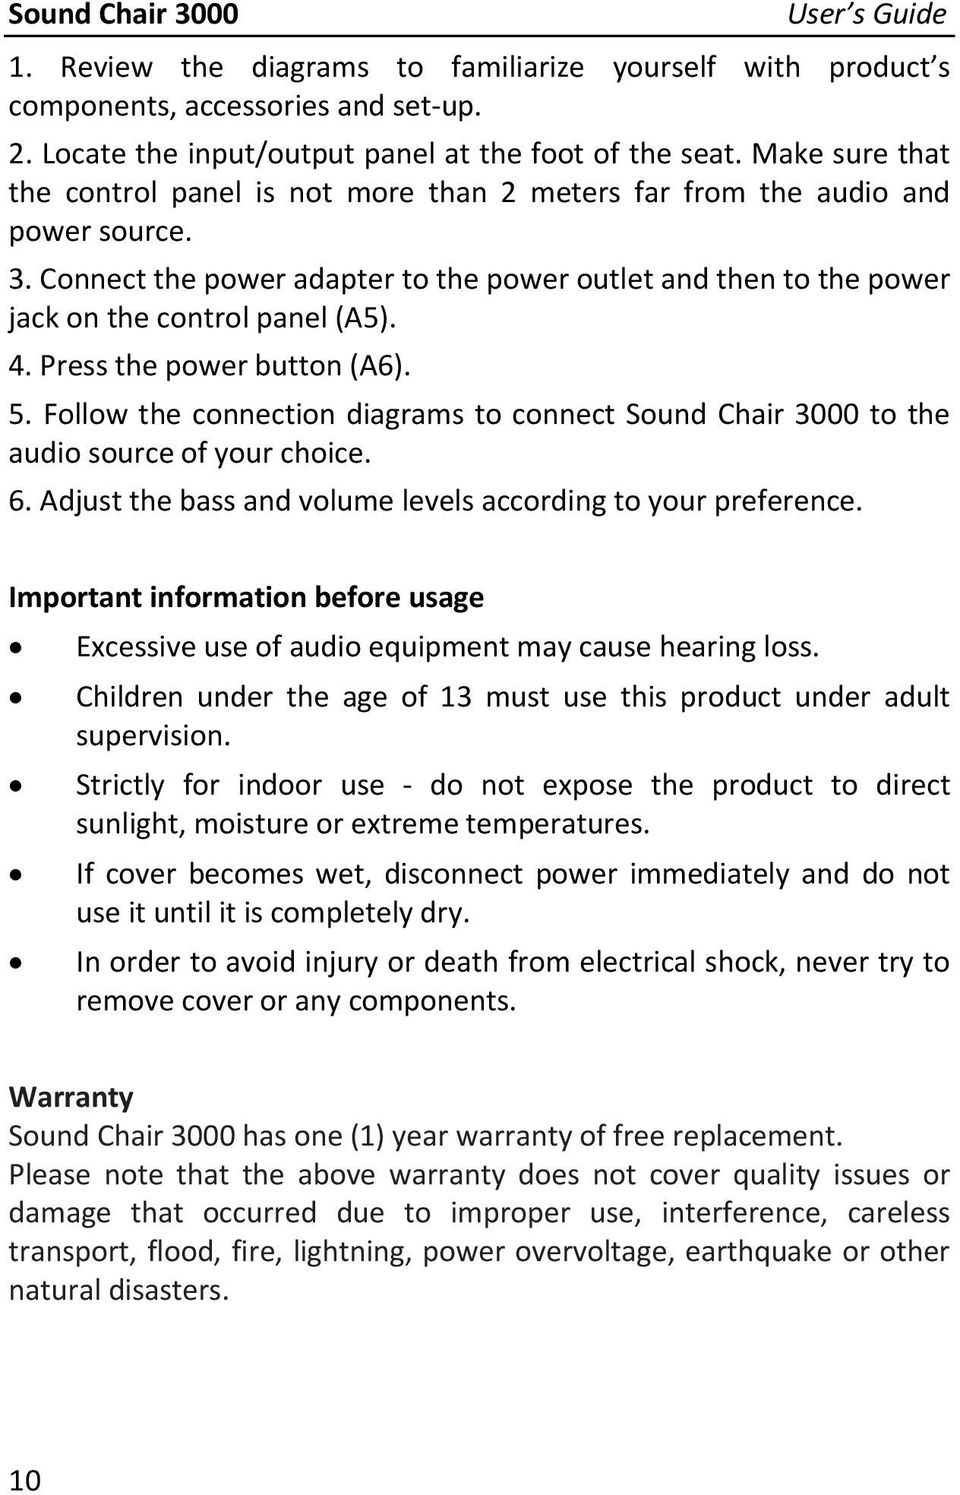 4. Press the power button (A6). 5. Follow the connection diagrams to connect Sound Chair 3000 to the audio source of your choice. 6. Adjust the bass and volume levels according to your preference.